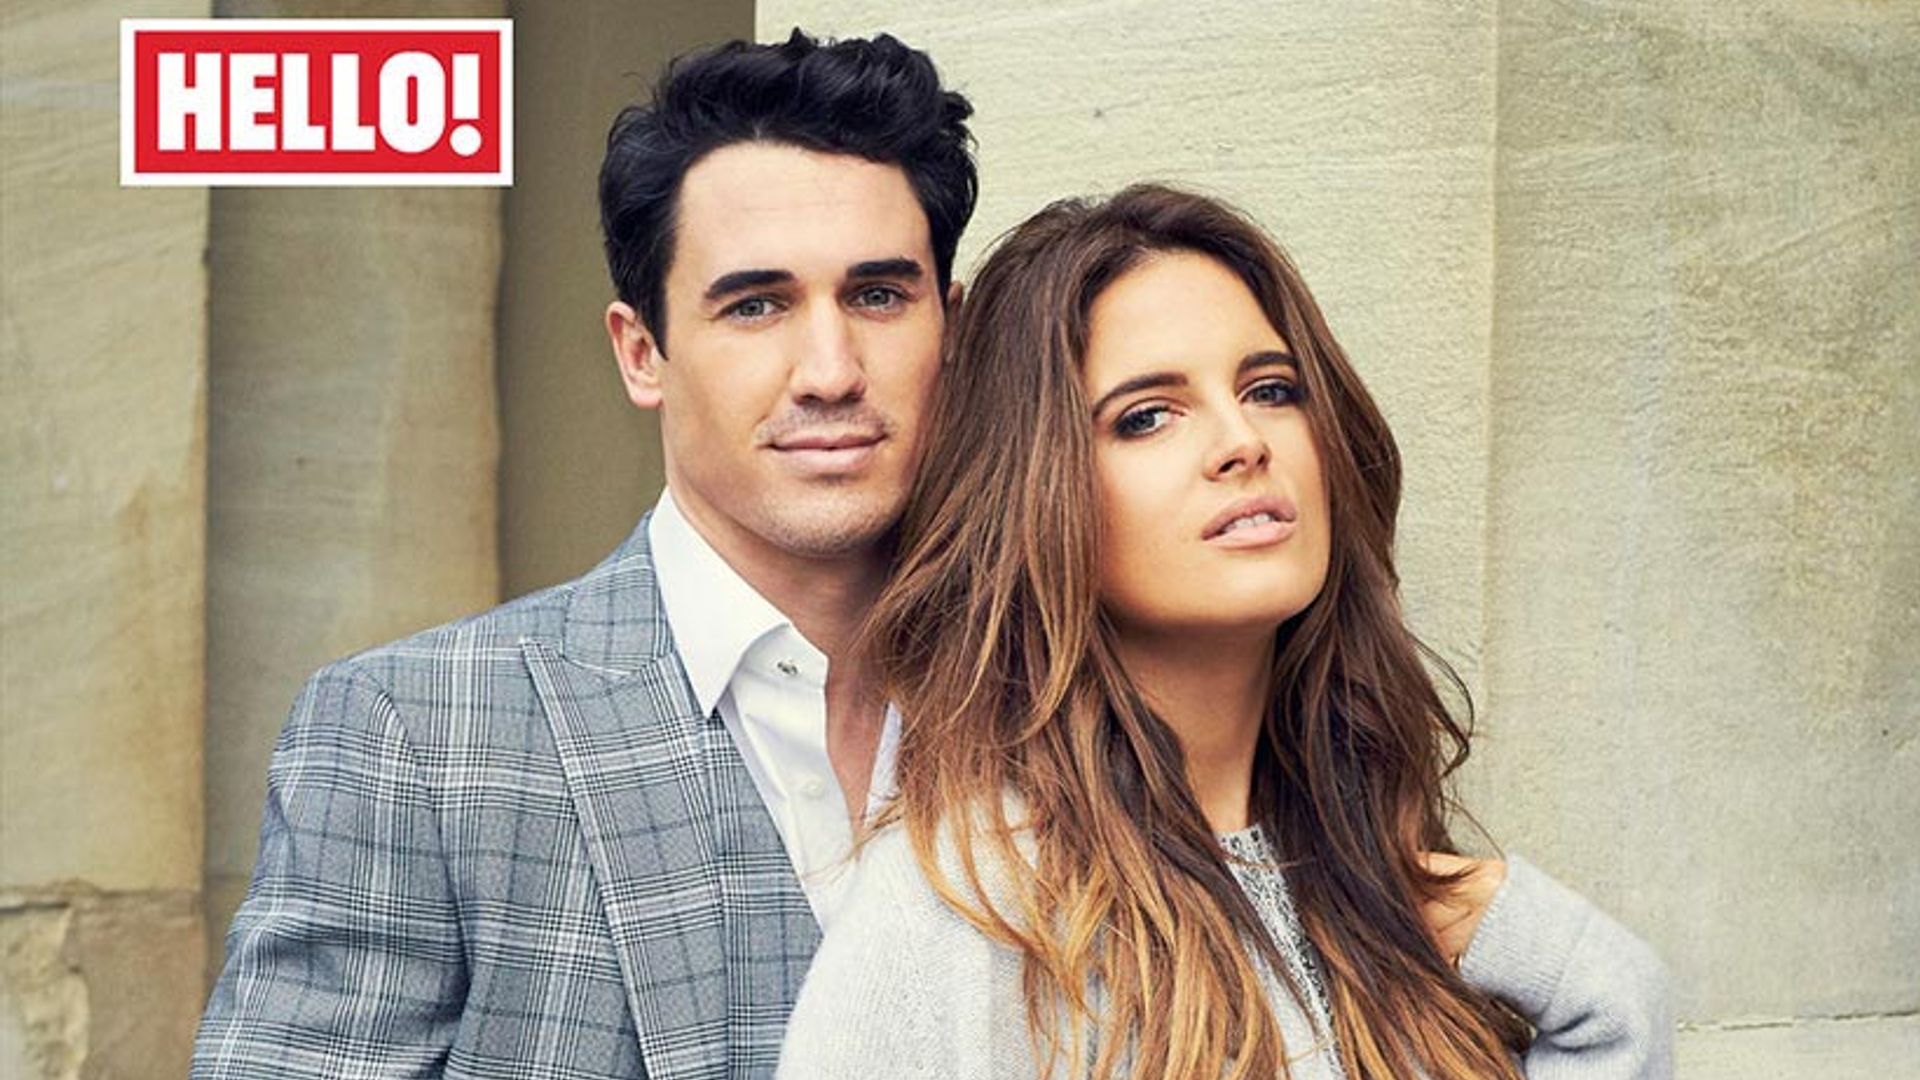 Binky Felstead gives fans an insight into her pregnancy fitness routine